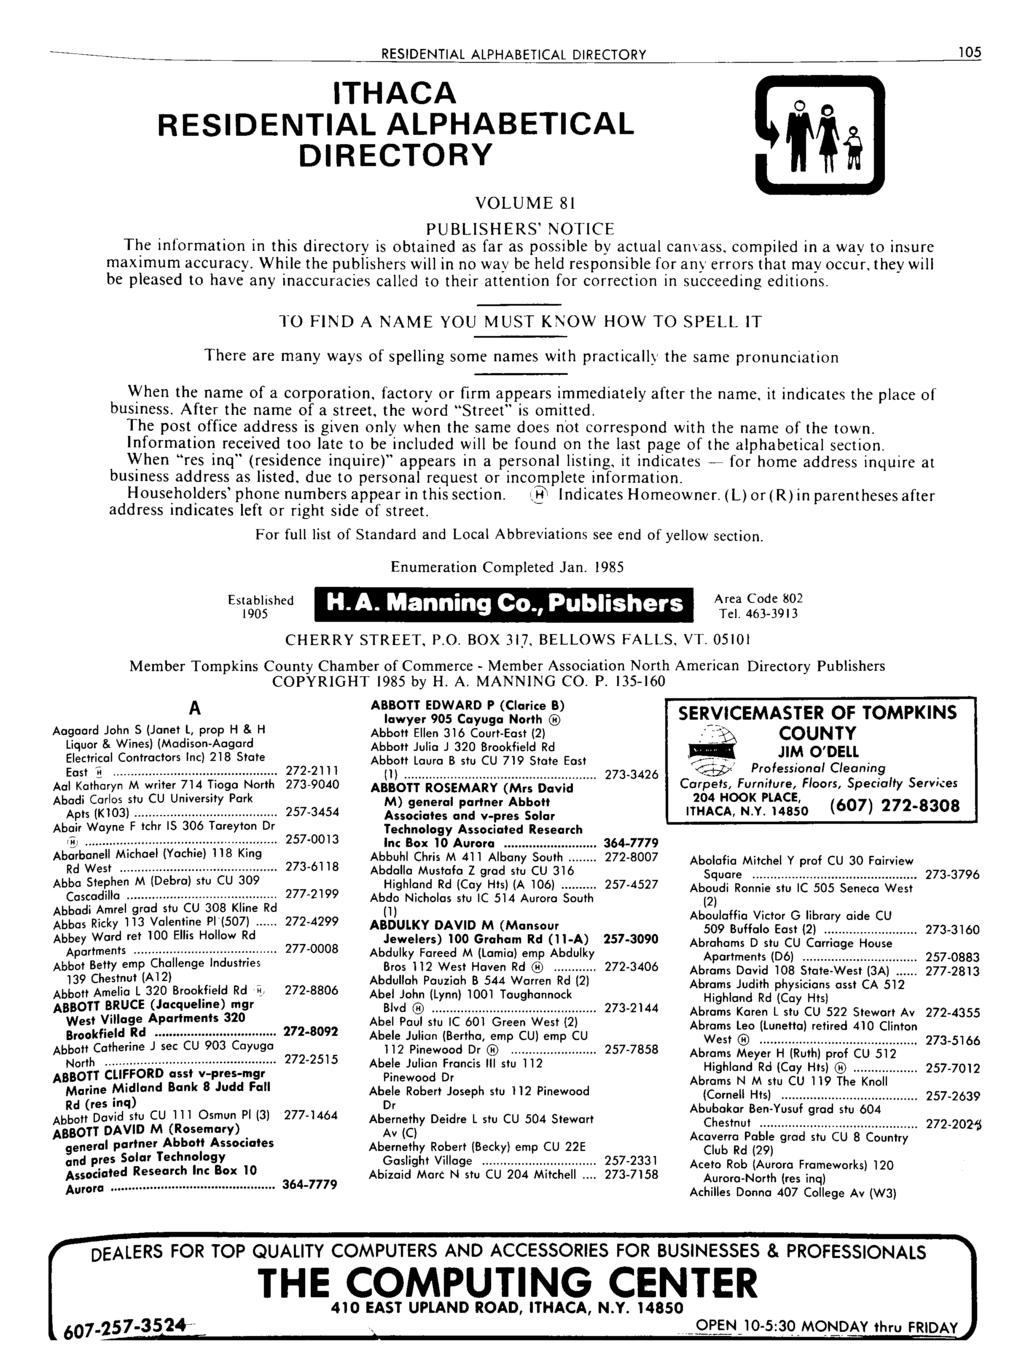 RESIDENTIAL ALPHABETICAL DIRECTORY 105 ITHACA RESIDENTIAL ALPHABETICAL DIRECTORY VOLUME 81 PUBLISHERS' NOTICE The information in this directory is obtained as far as possible by actual canvass,